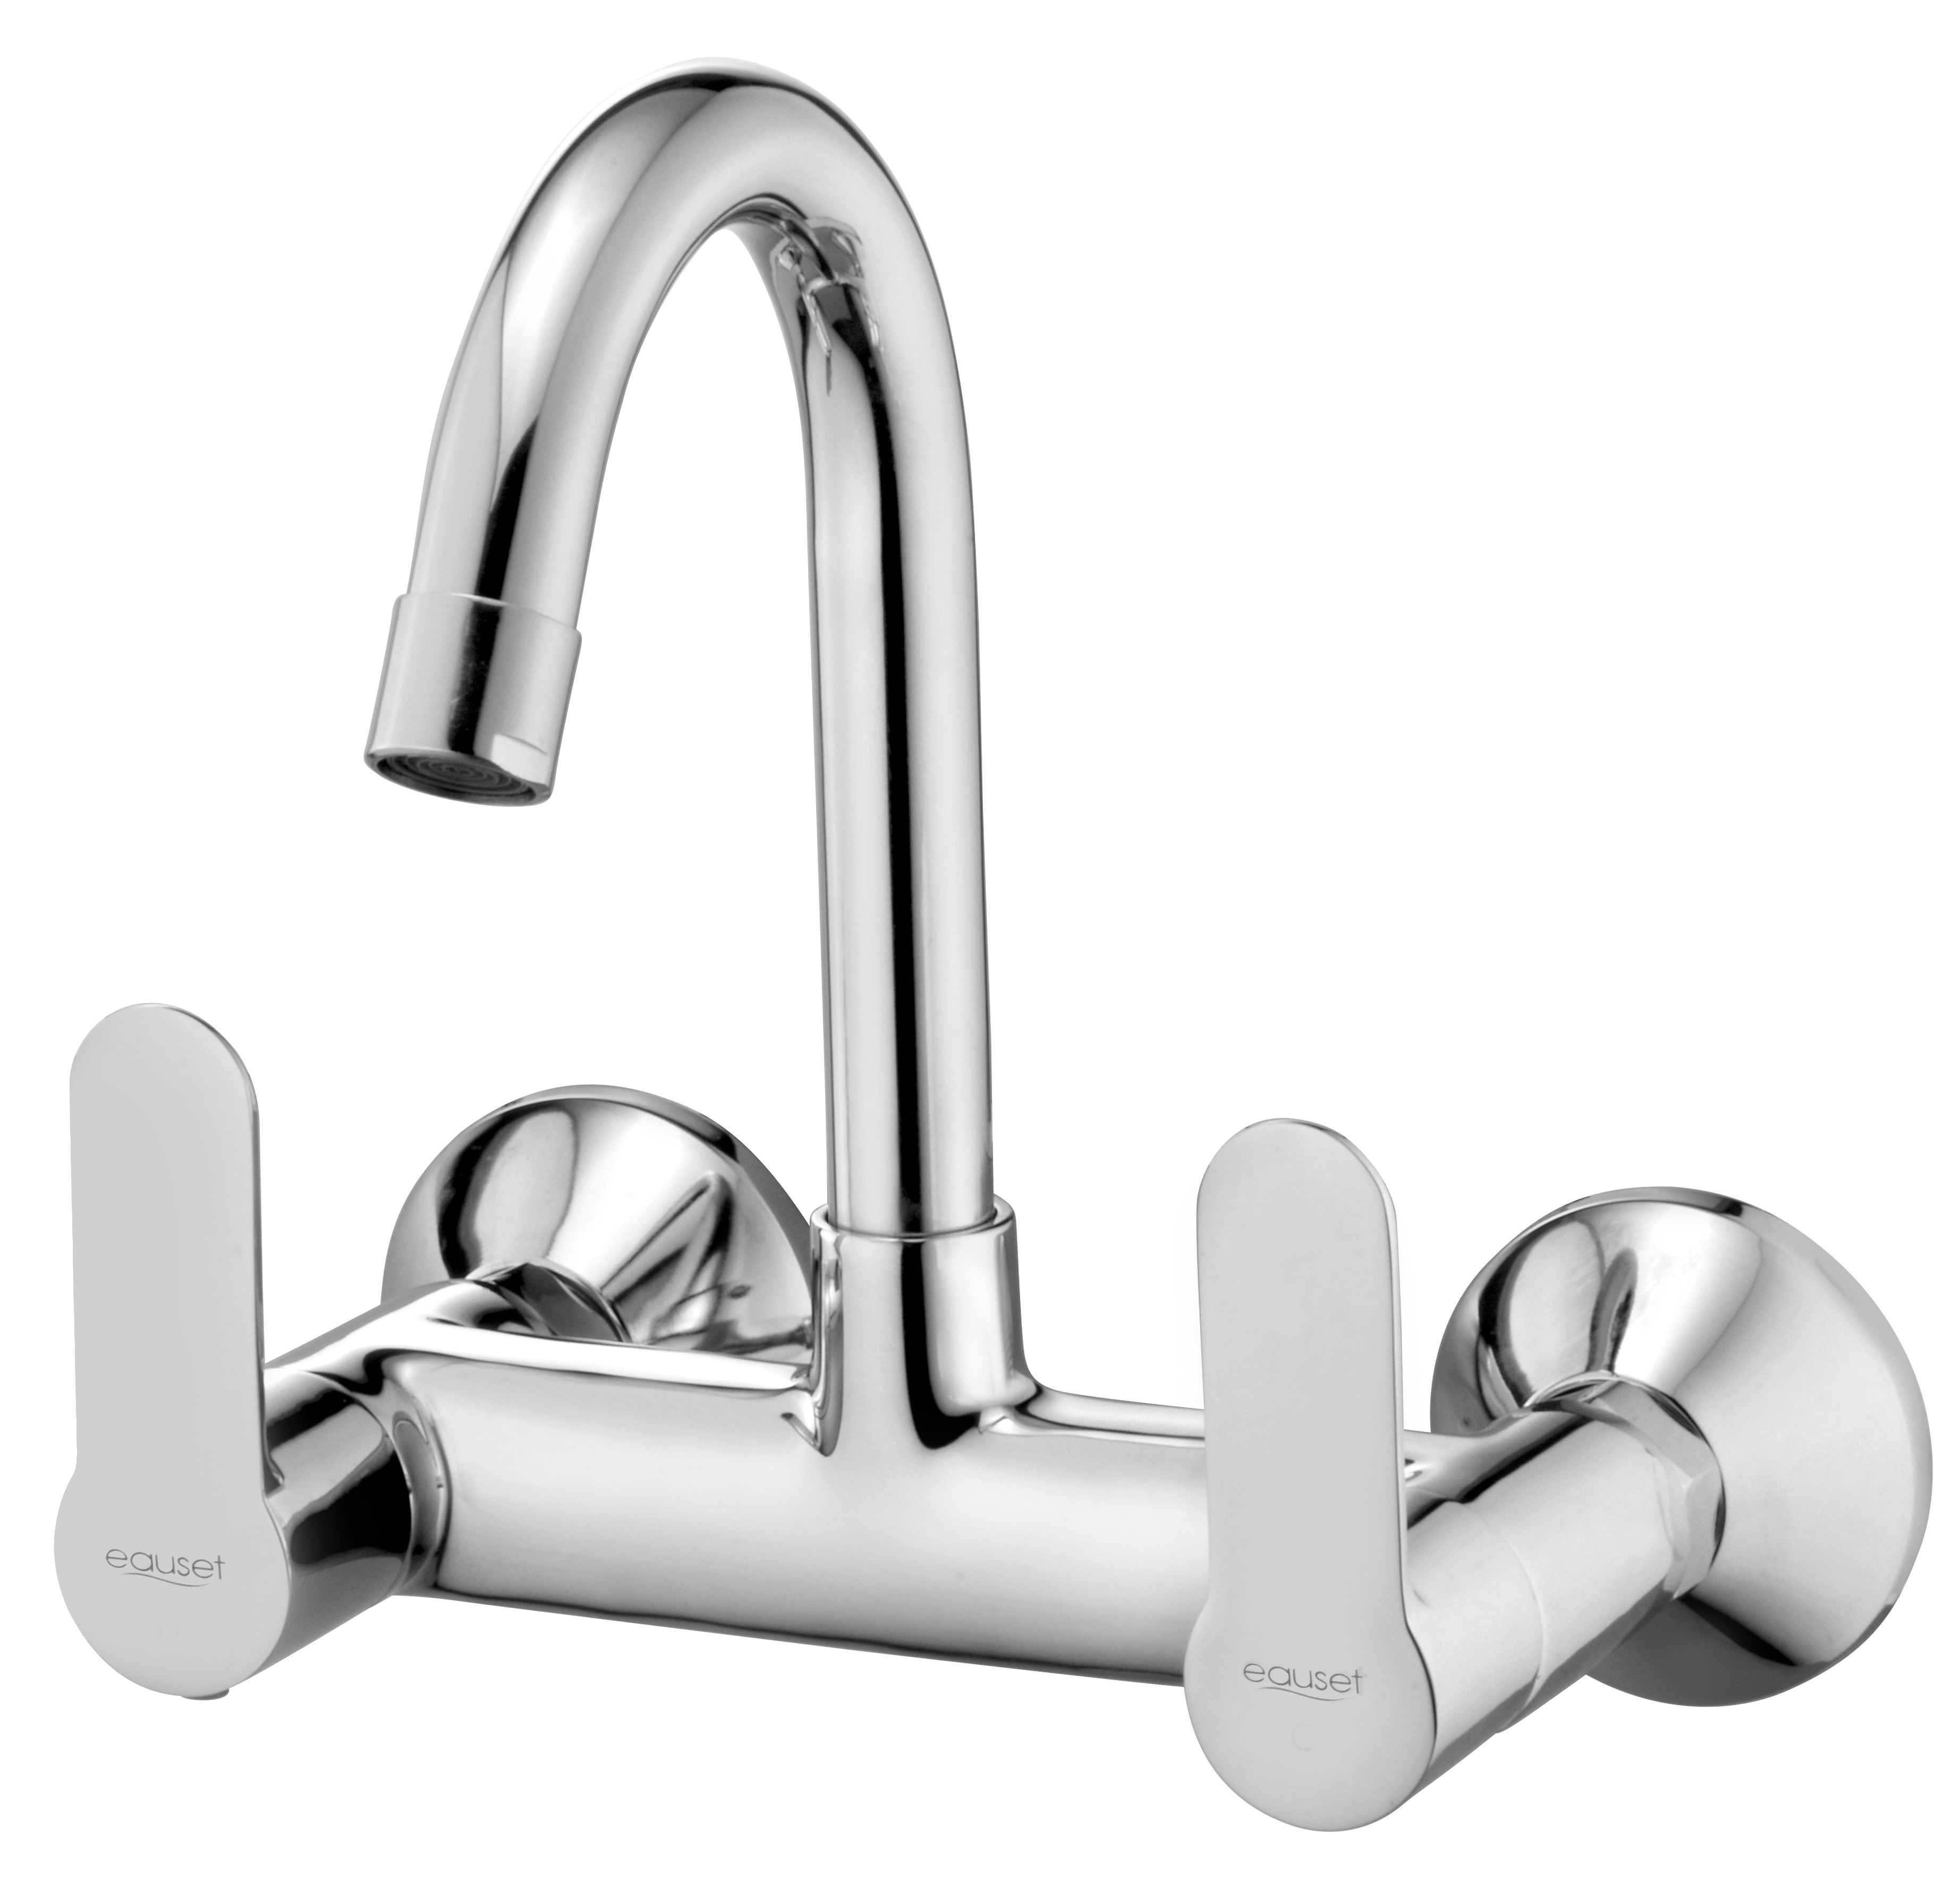 Sink faucets